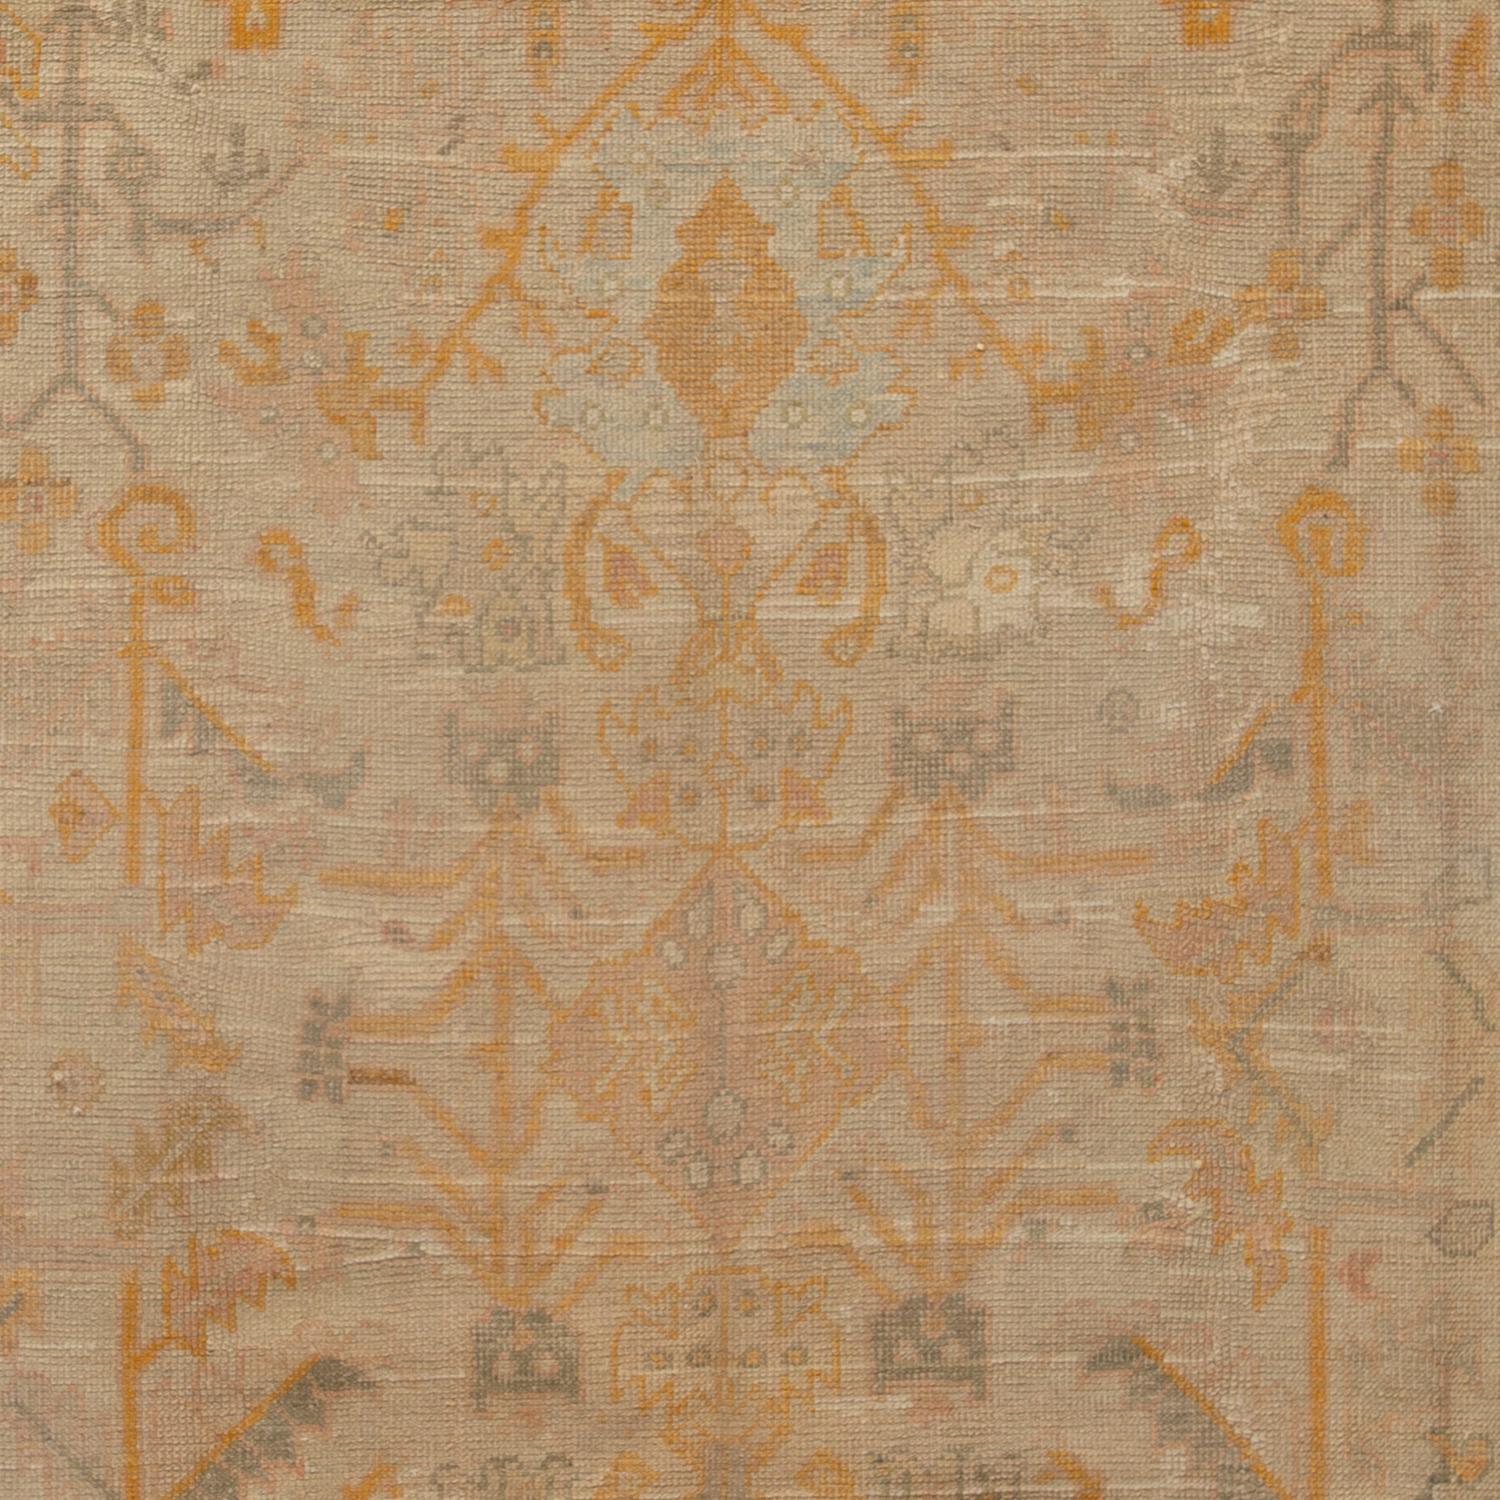 This Beige Vintage Traditional Wool Oushak Rug - 8'2